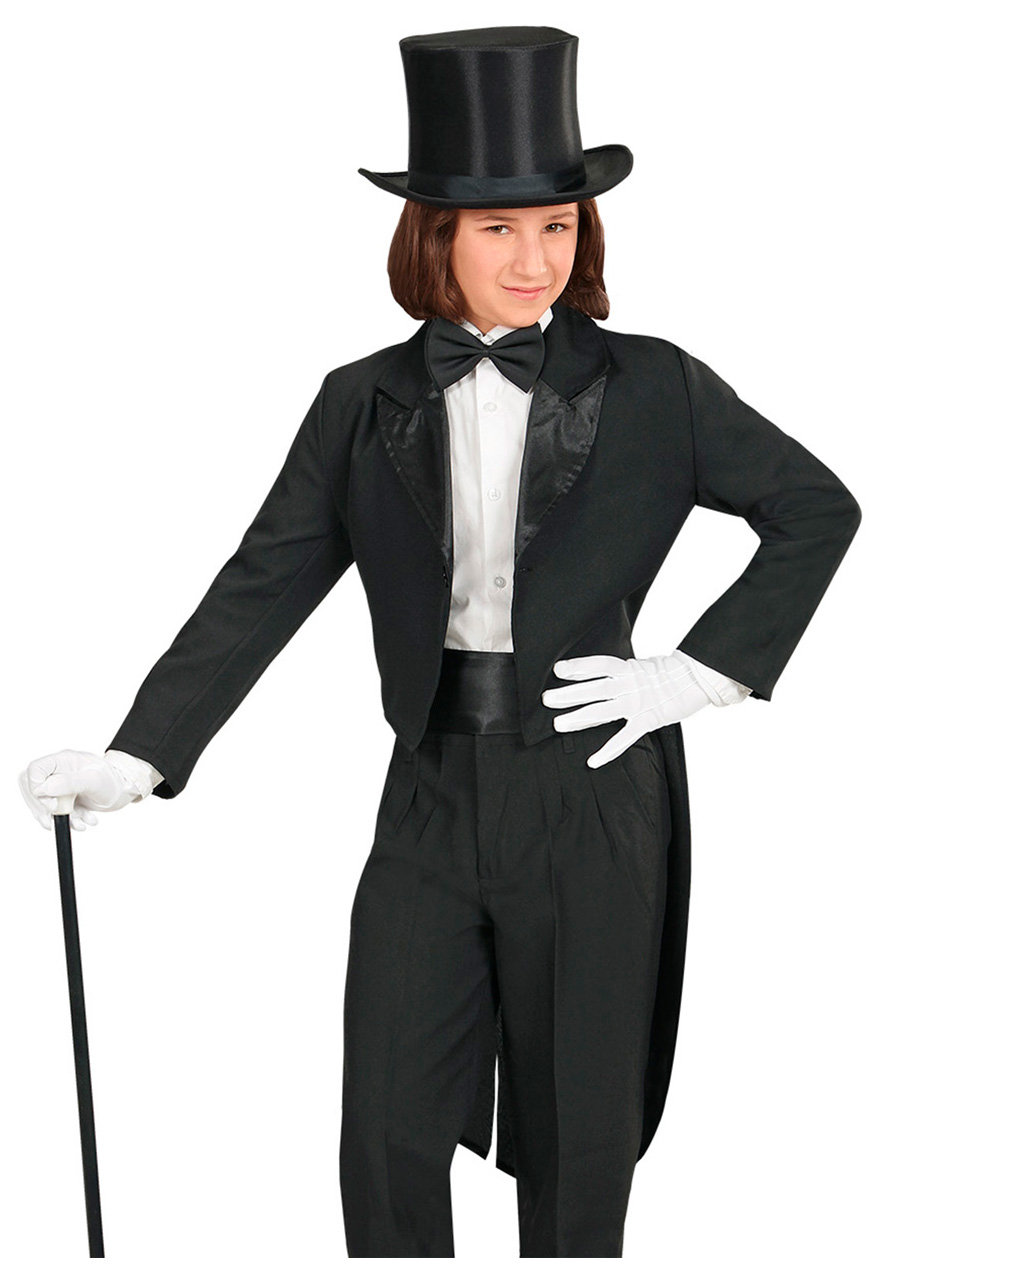 CHILDREN/'S BLACK TAILCOAT WITH SATIN COLLAR FANCY DRESS COSTUME JACKET ONLY